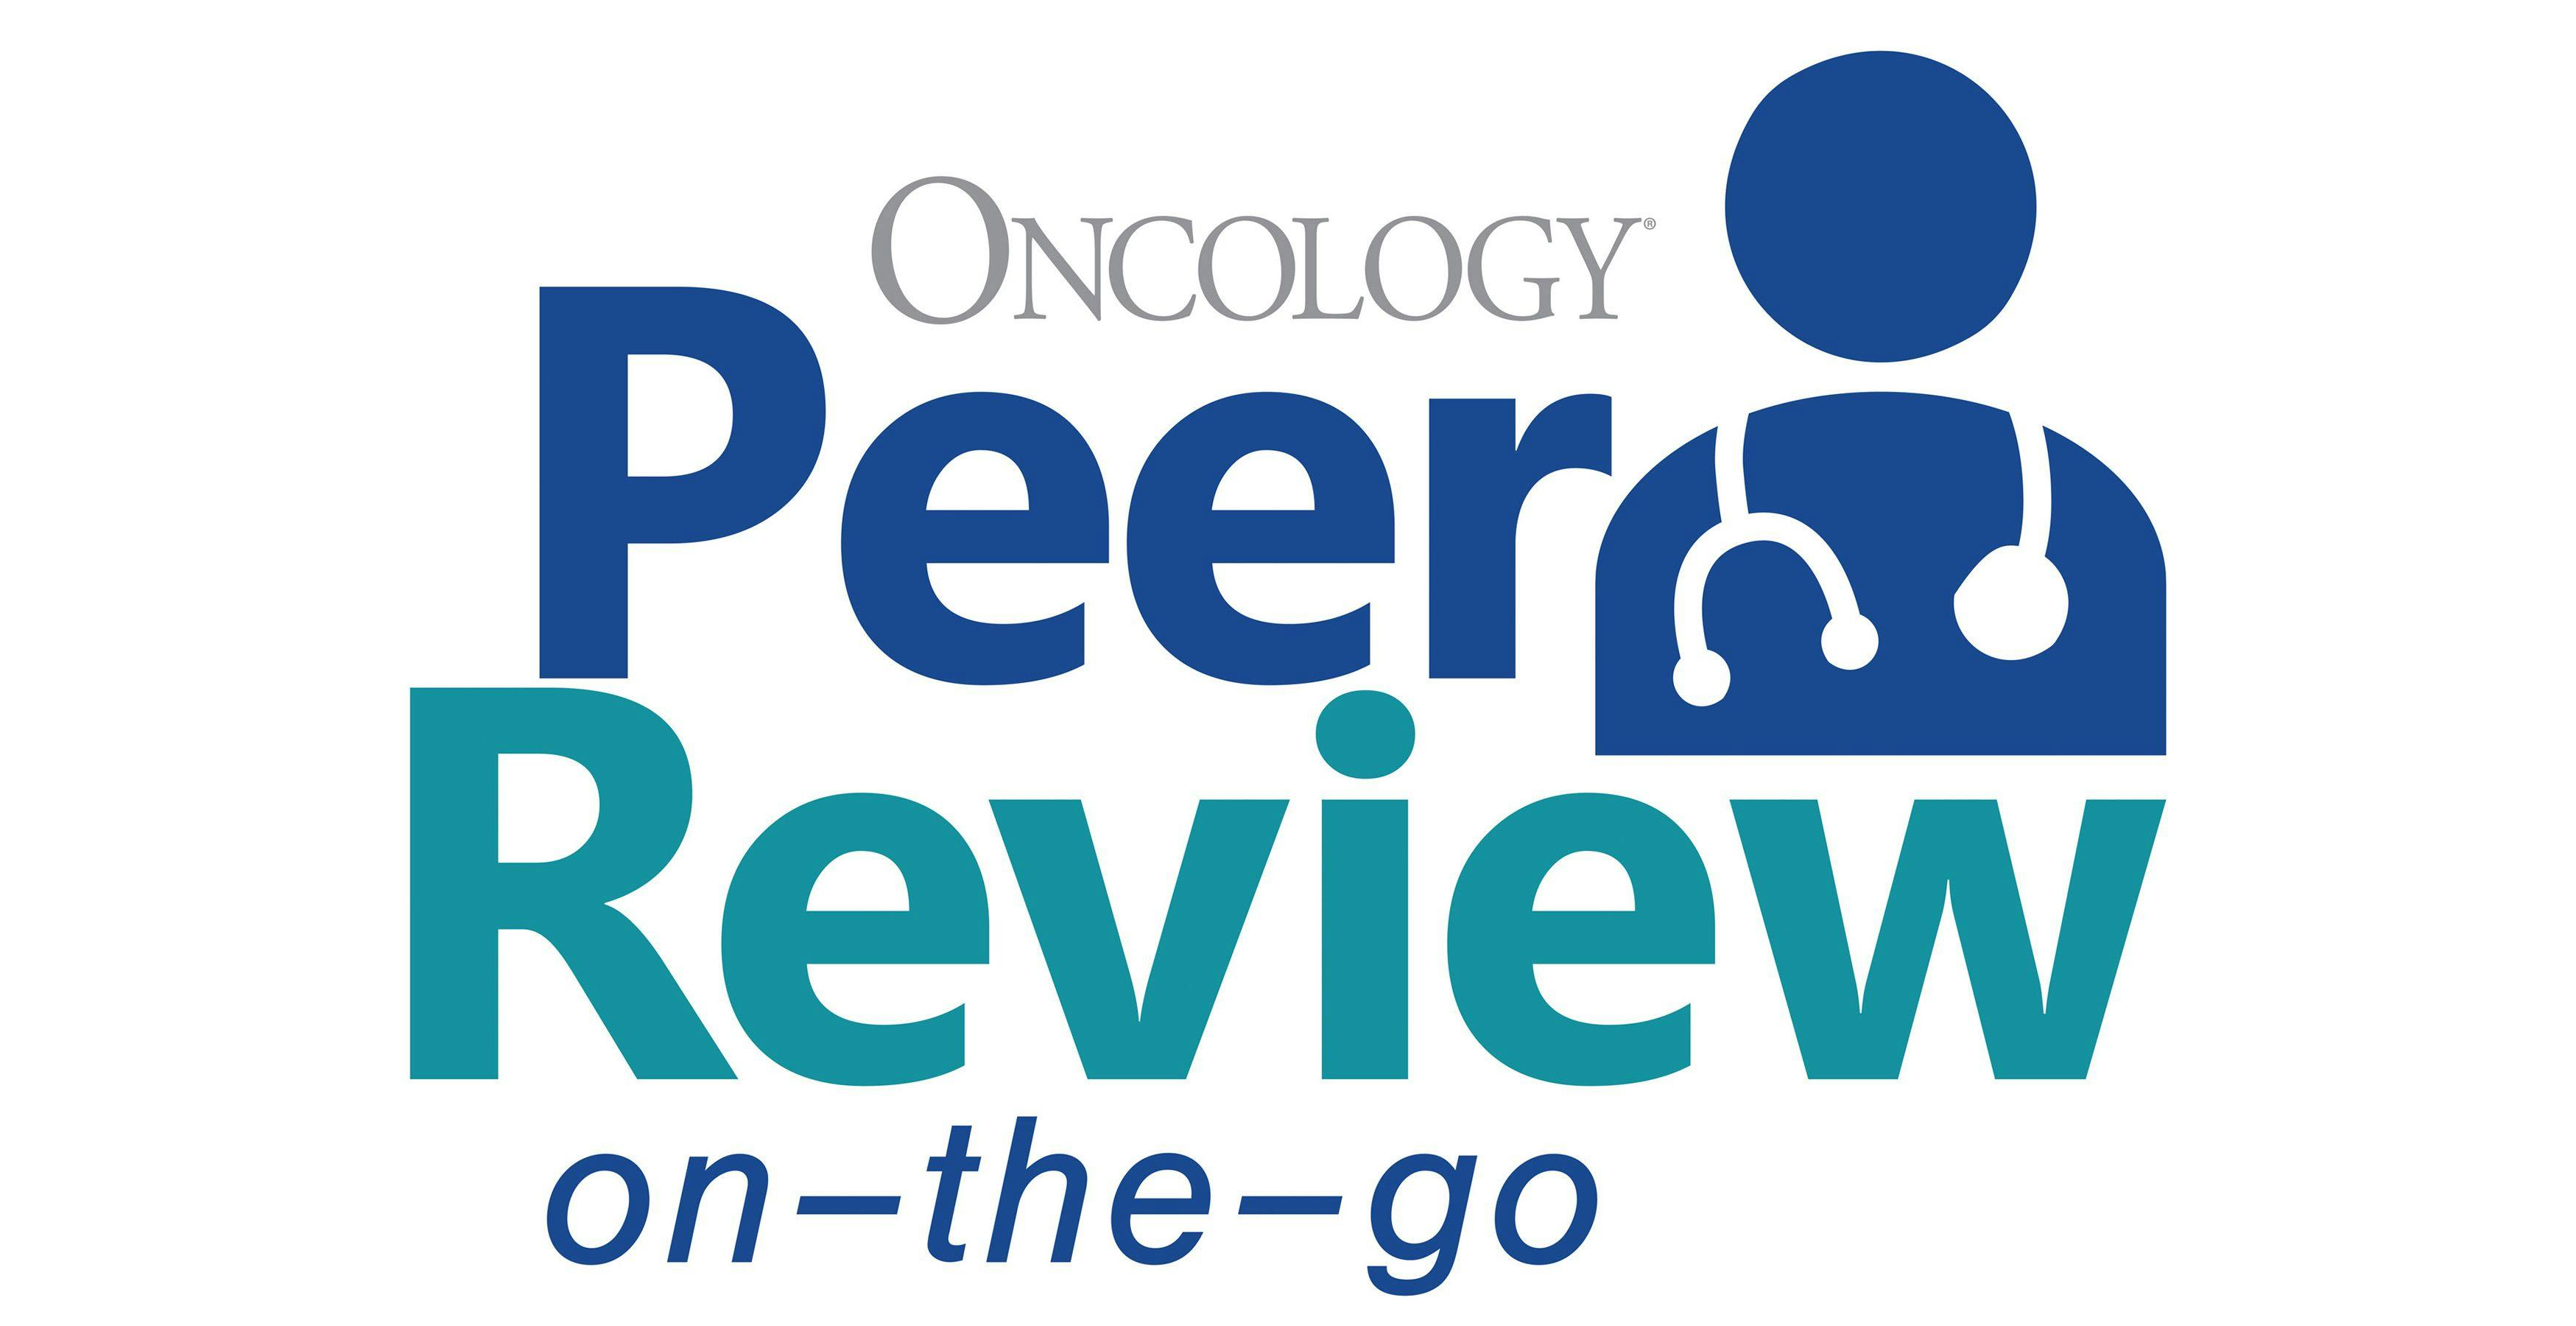 Oncology Peer Review On-The-Go: Efficacy of PARP Inhibitors as Maintenance Therapy for Metastatic Castration-Resistant Prostate Cancer